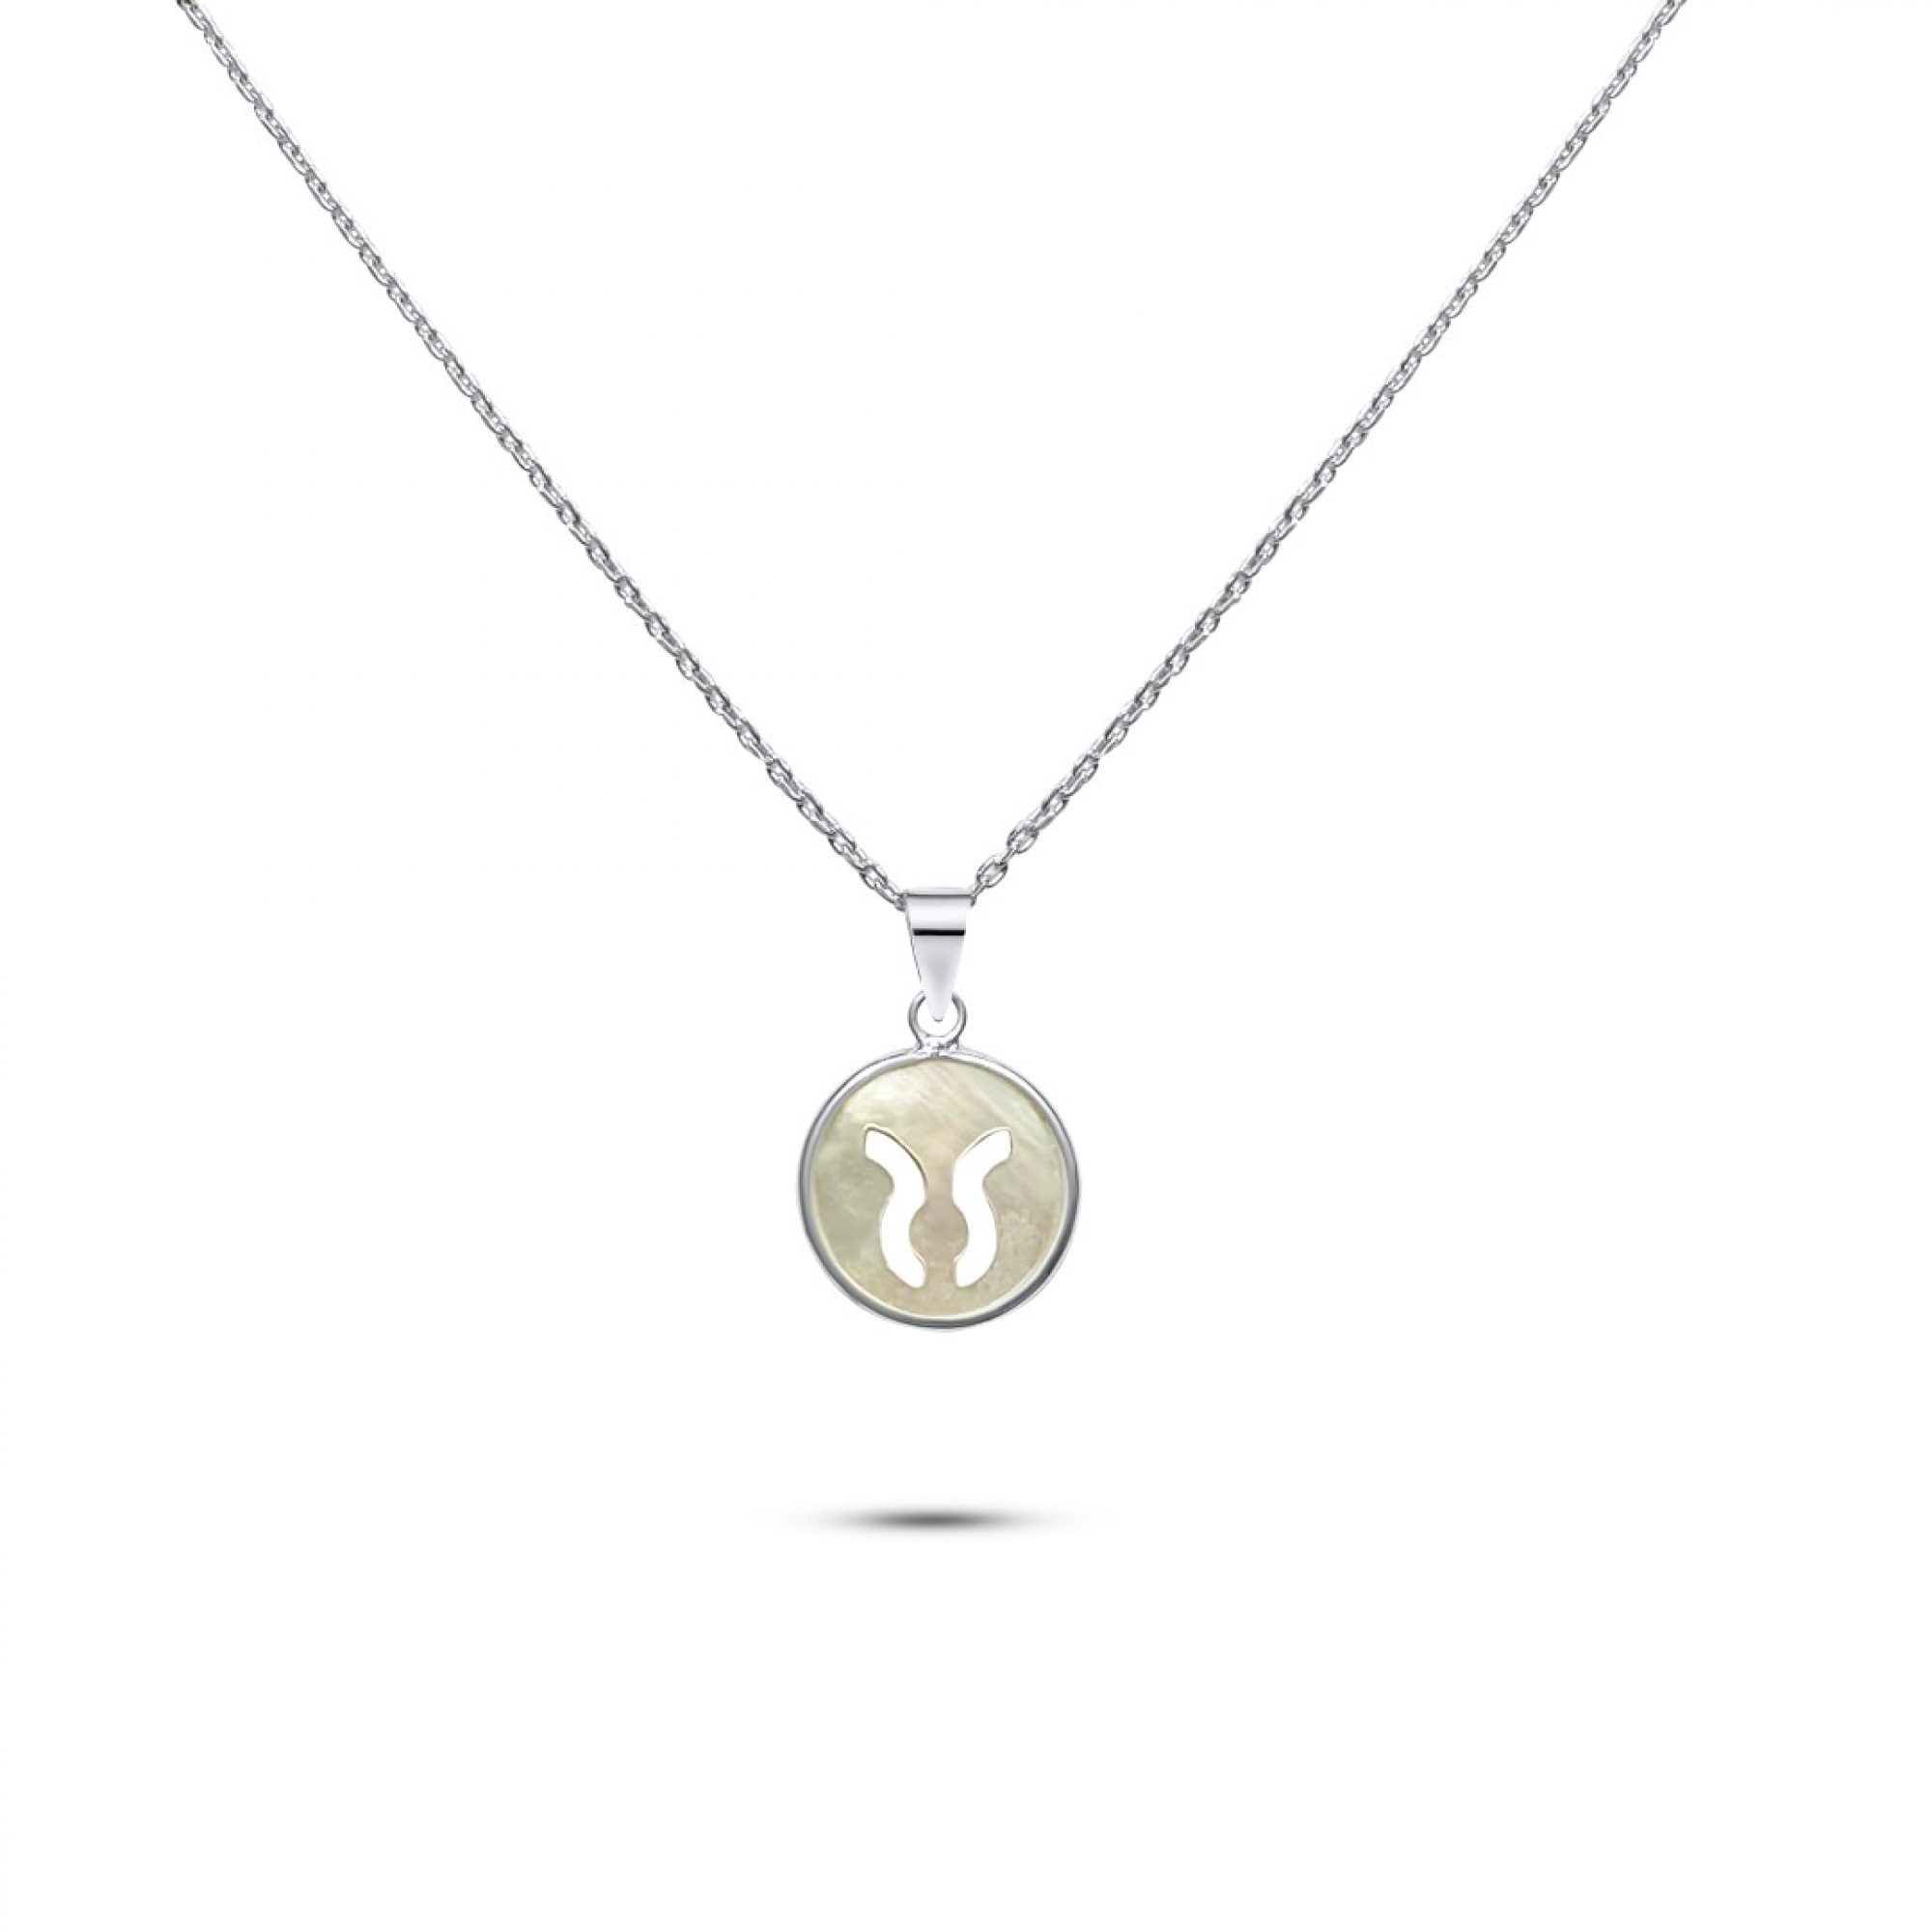 Taurus sign necklace with mother of pearl